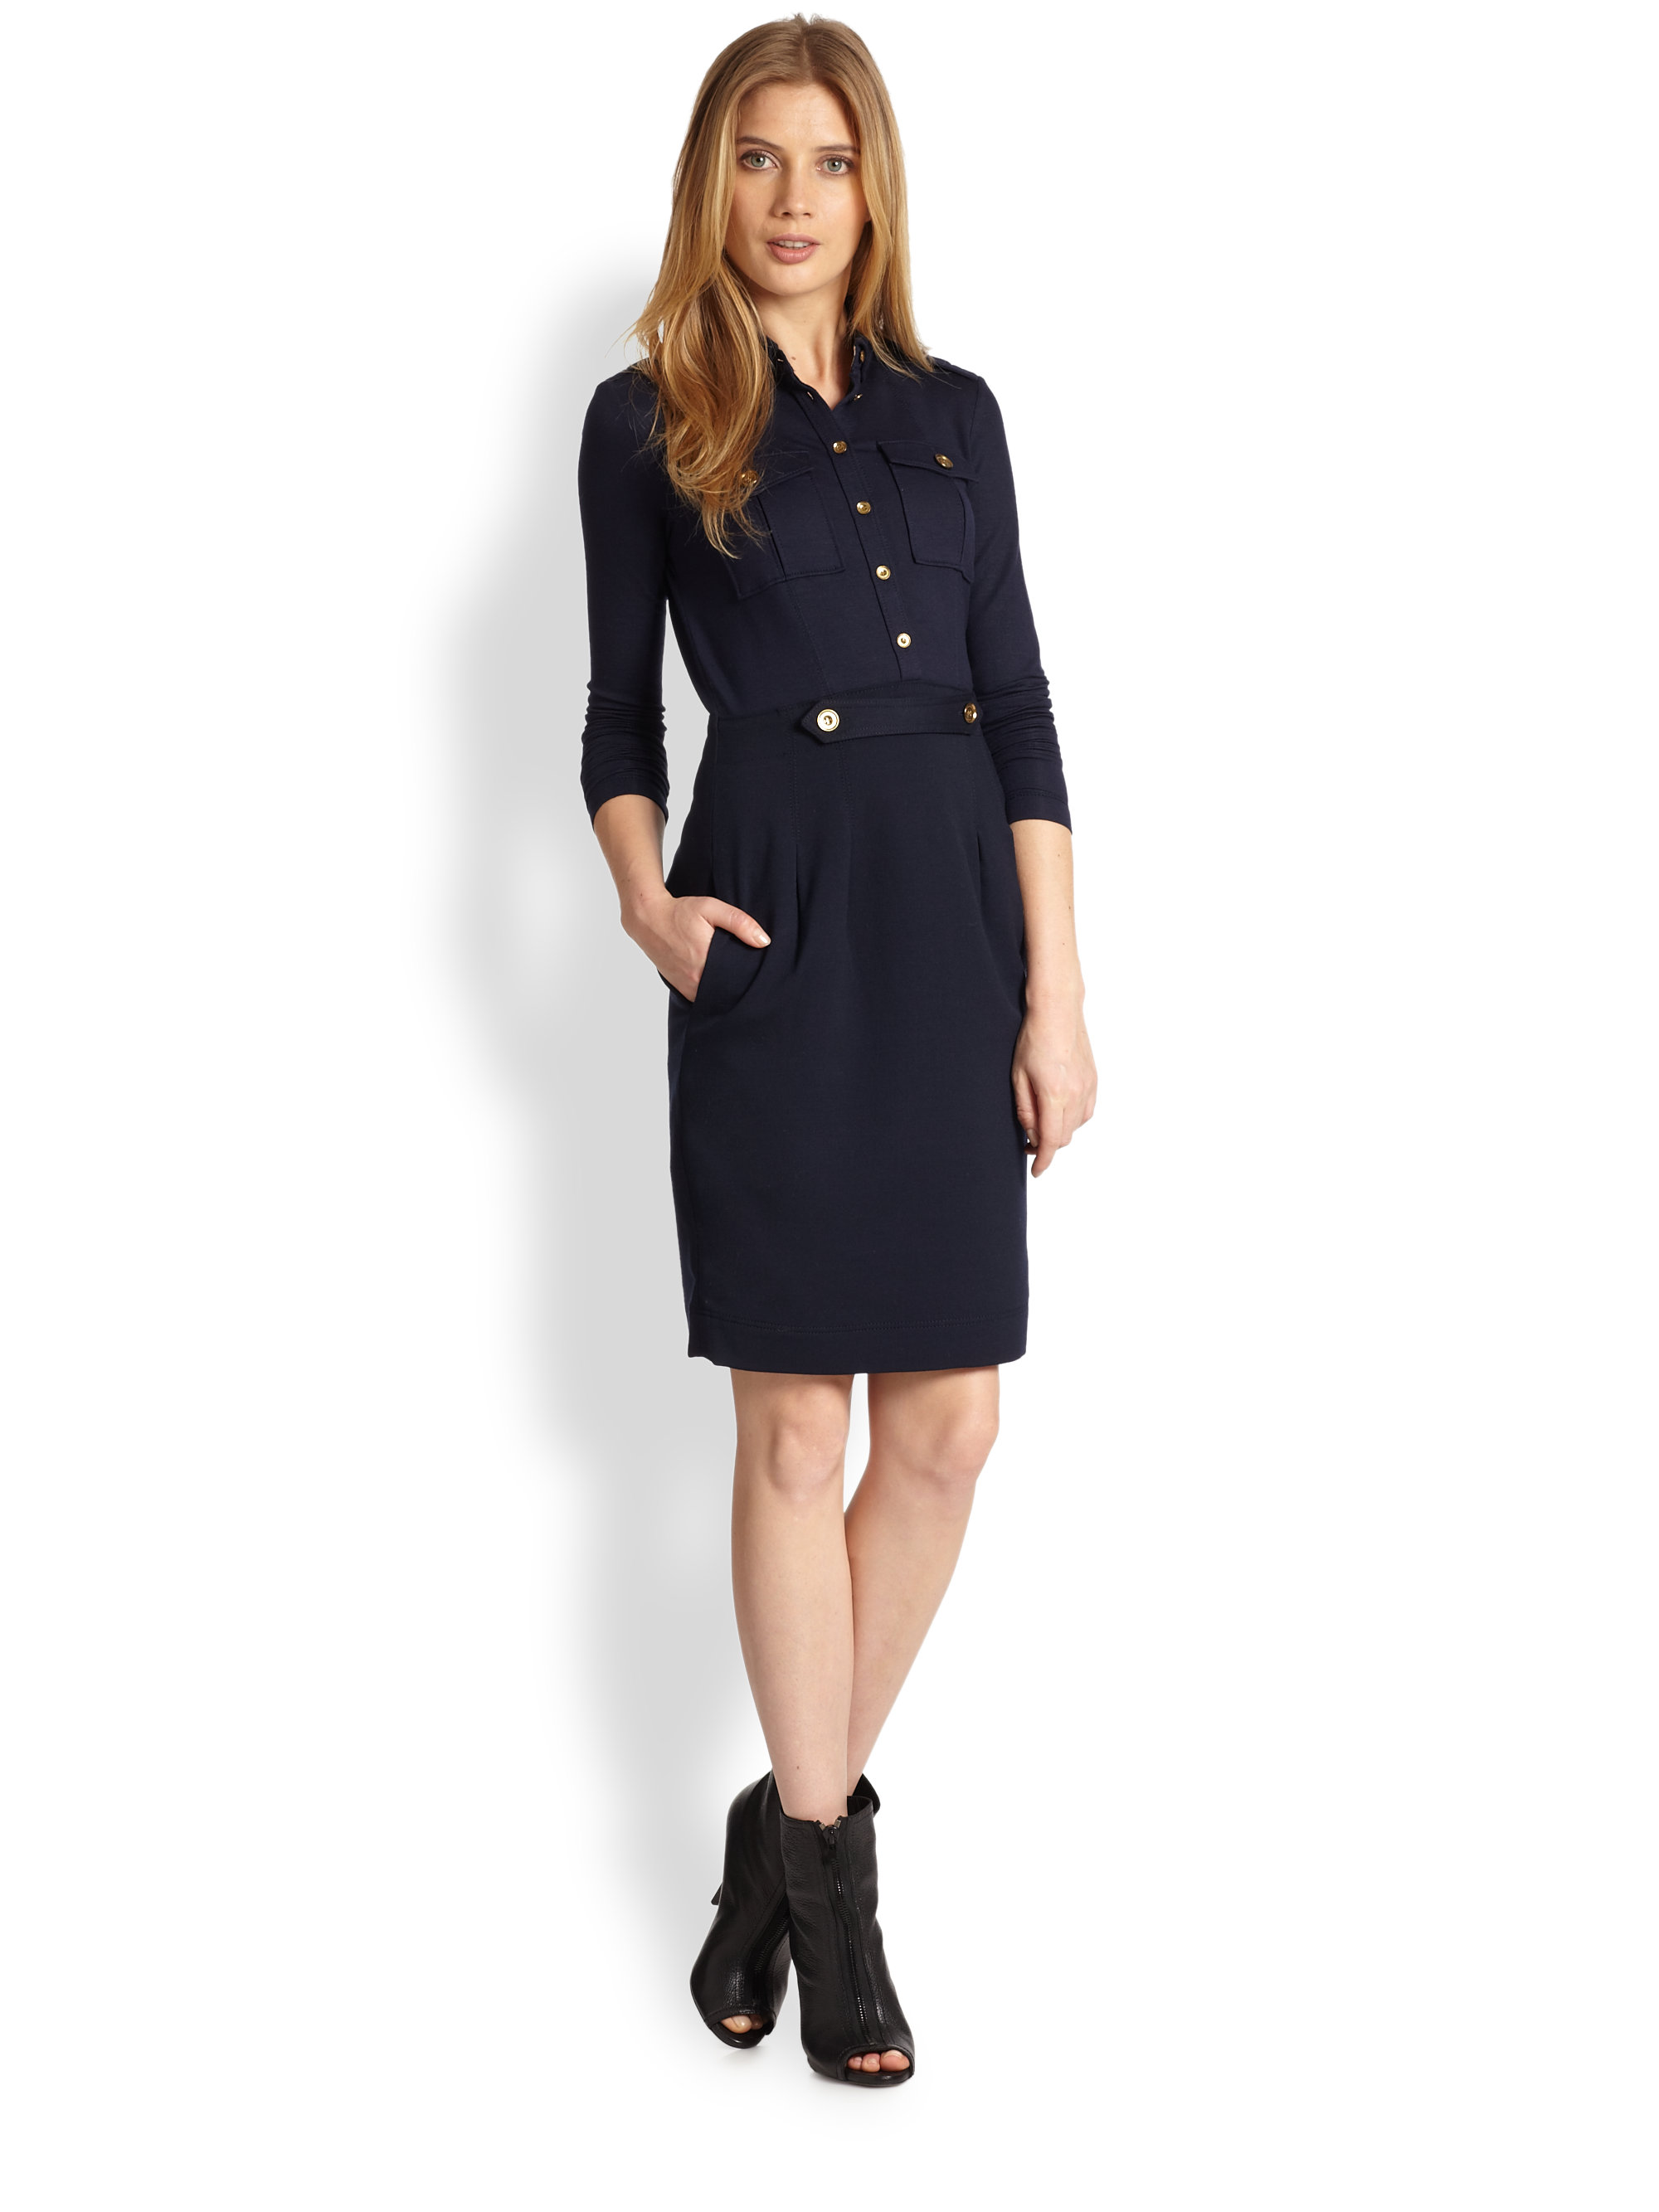 Burberry Brit Military Knit Dress in 